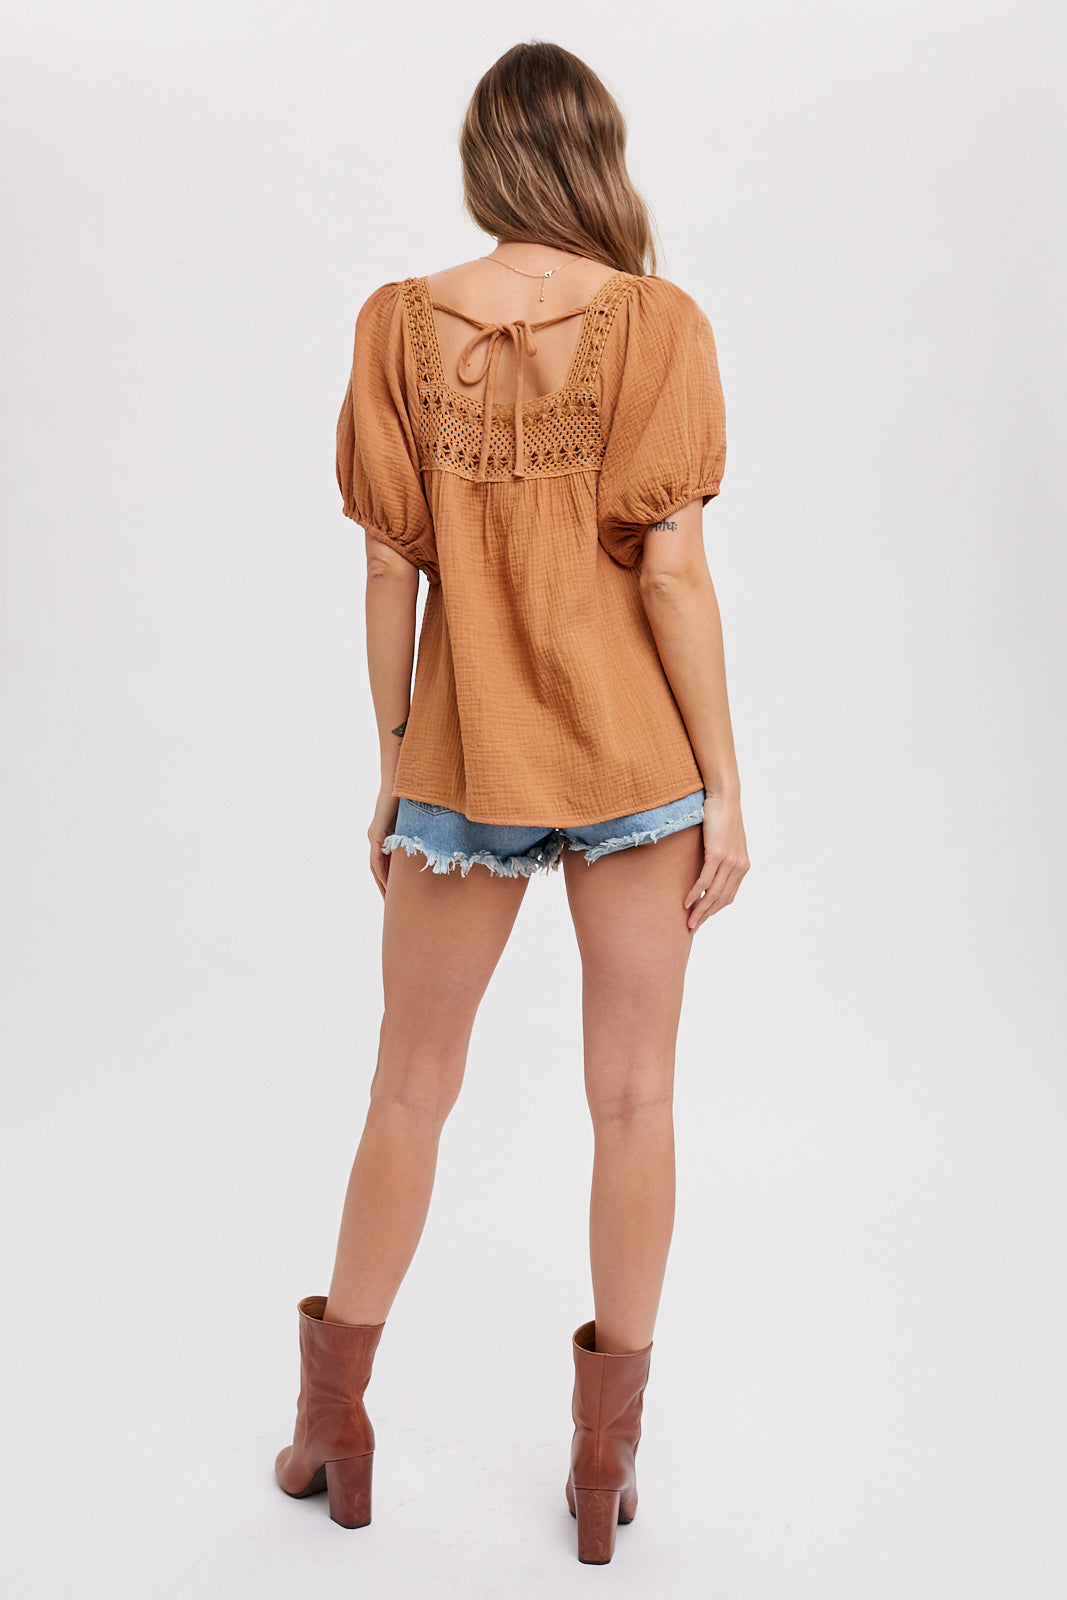 Boho Blouse With Short Puffed Sleeves in Camel